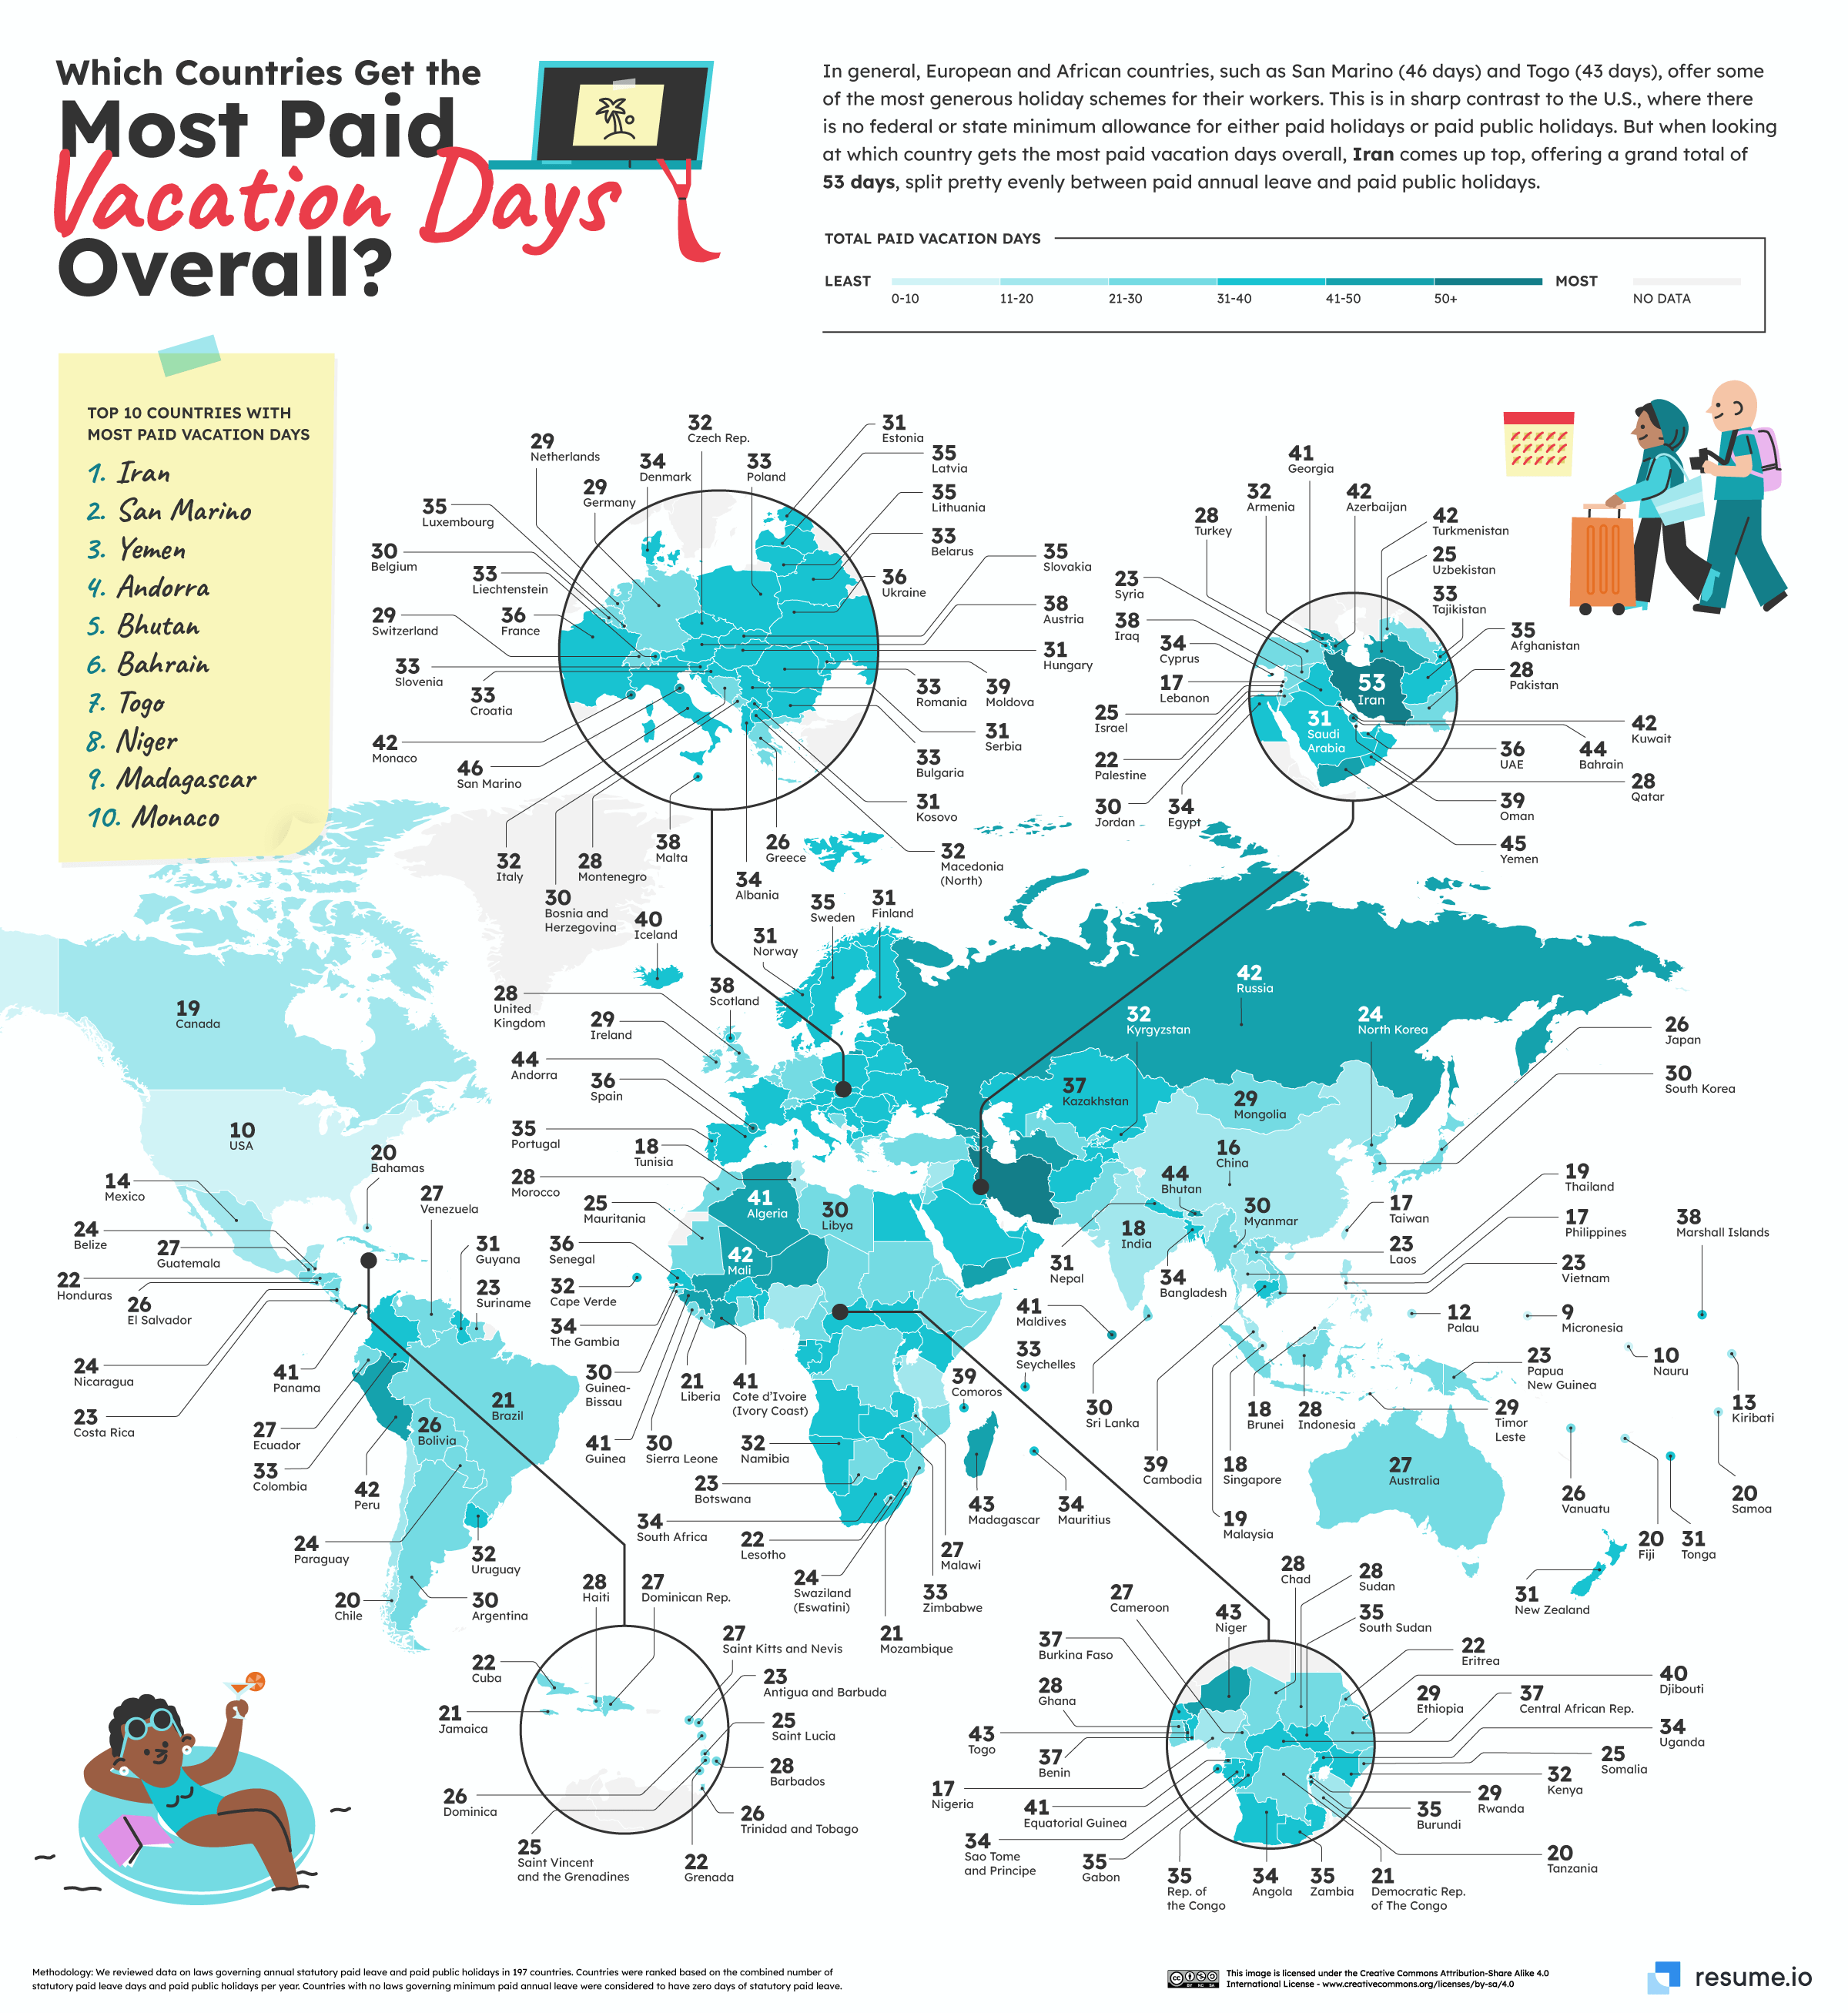 Which countries get the most paid vacation days?